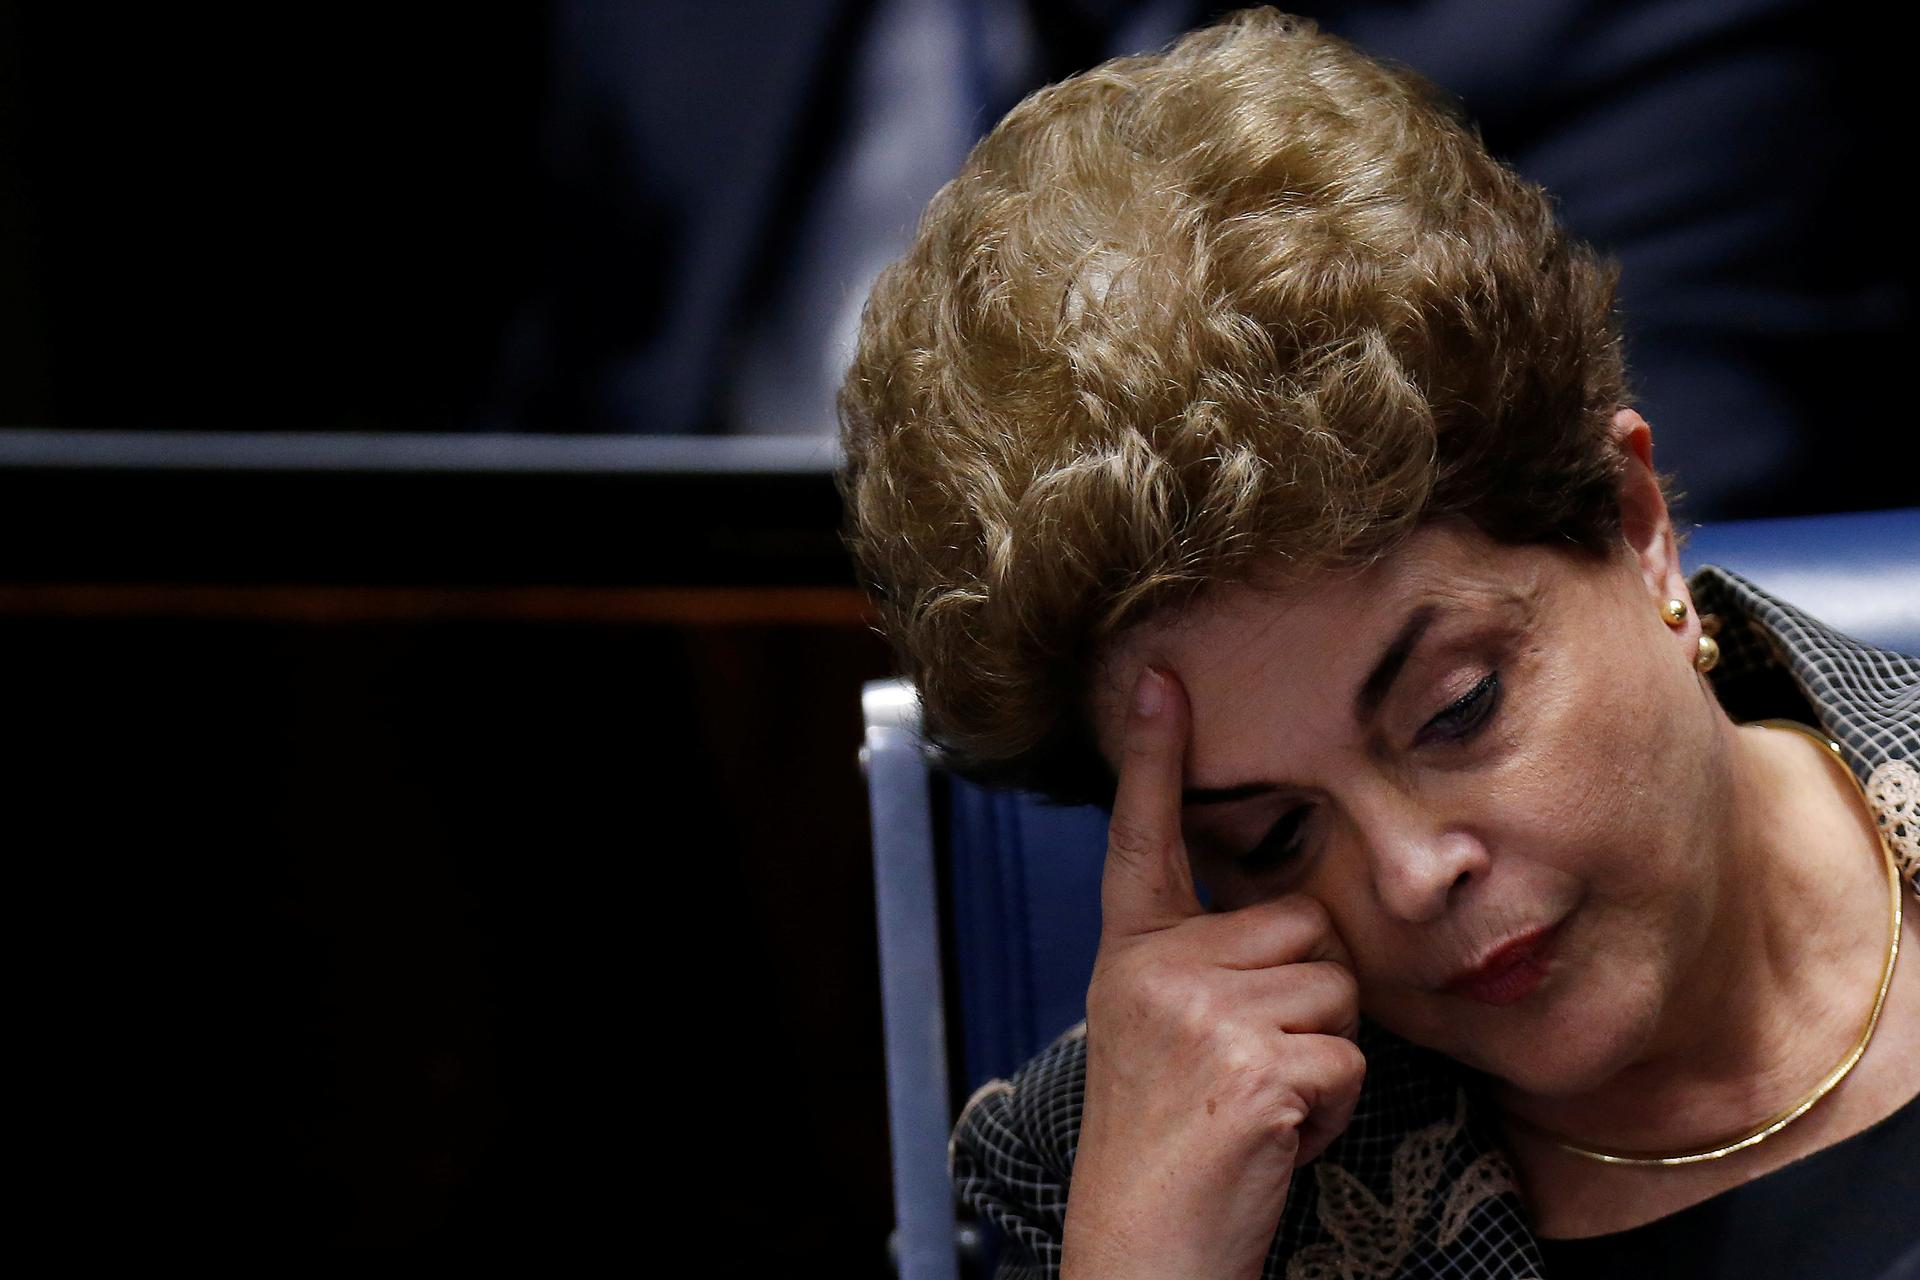 Dilma Rousseff at one of the final days of her impeachment trial debate before senators voted her out of office.